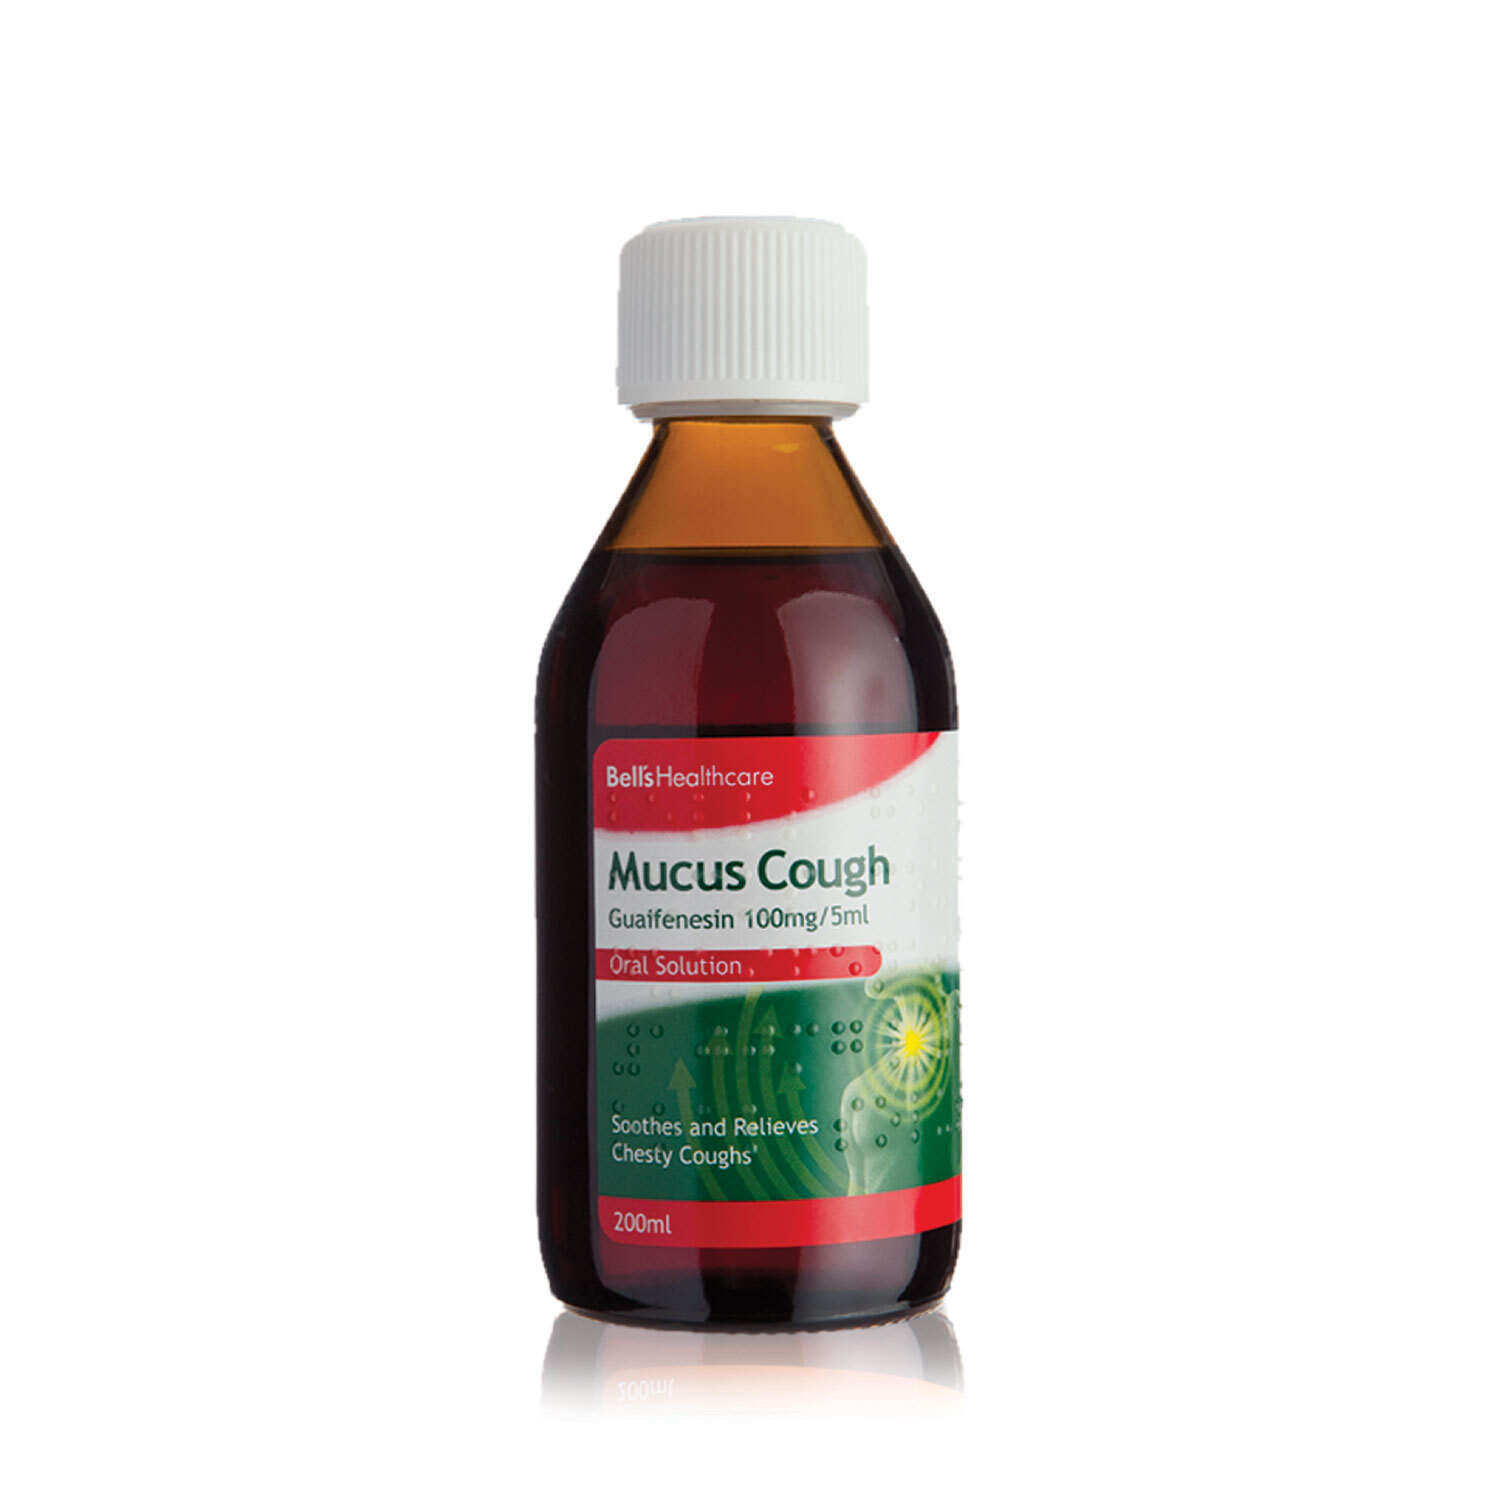 Bell's Healthcare Mucus Cough Syrup Image